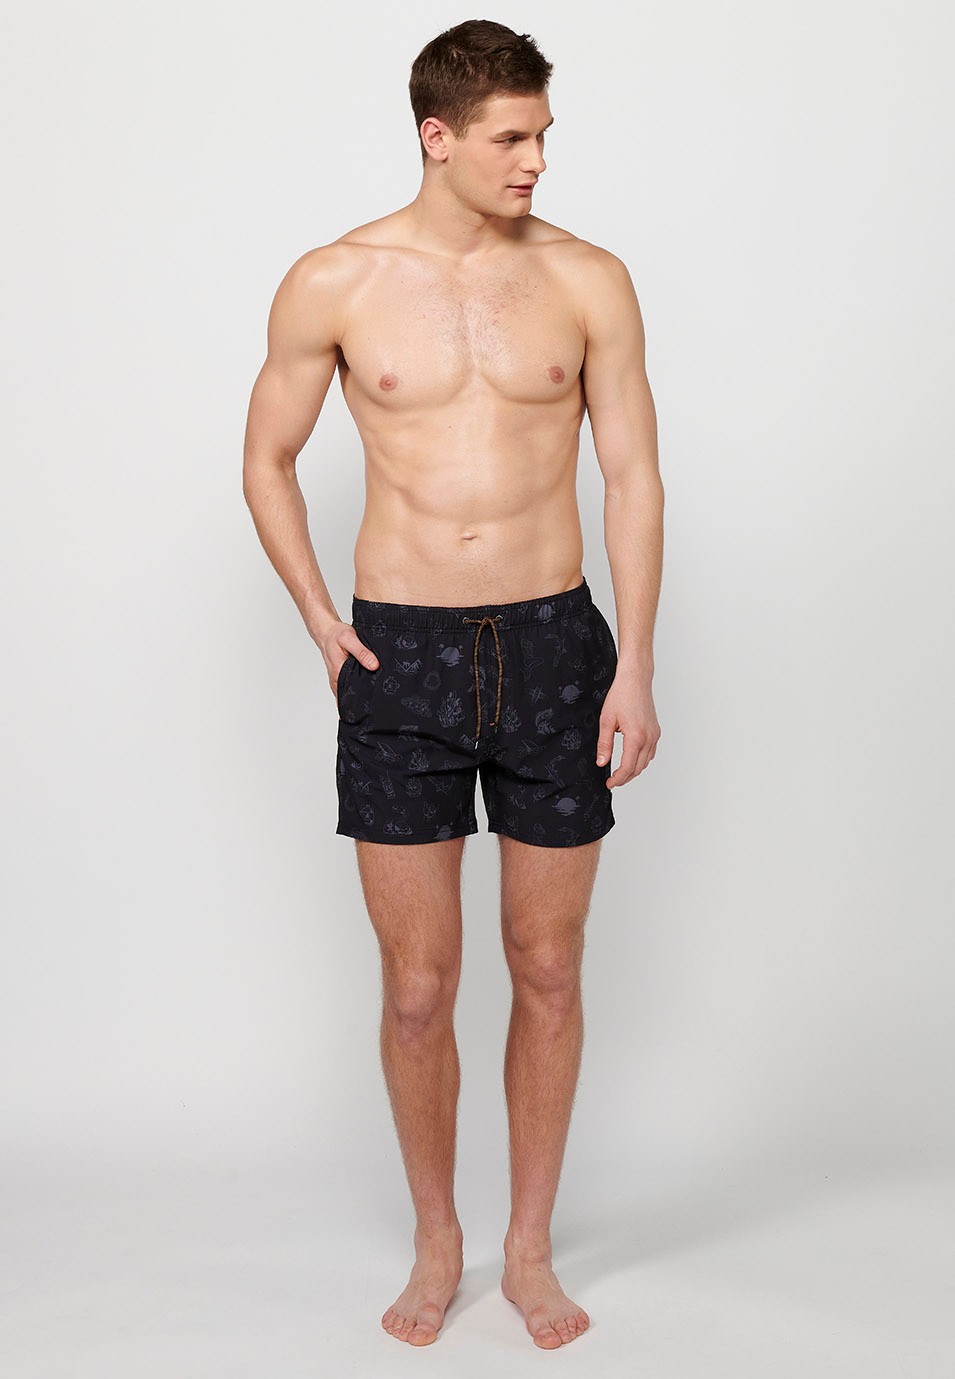 Printed short swimsuit with adjustable waist with drawstring and back pocket and an inner gray color for men